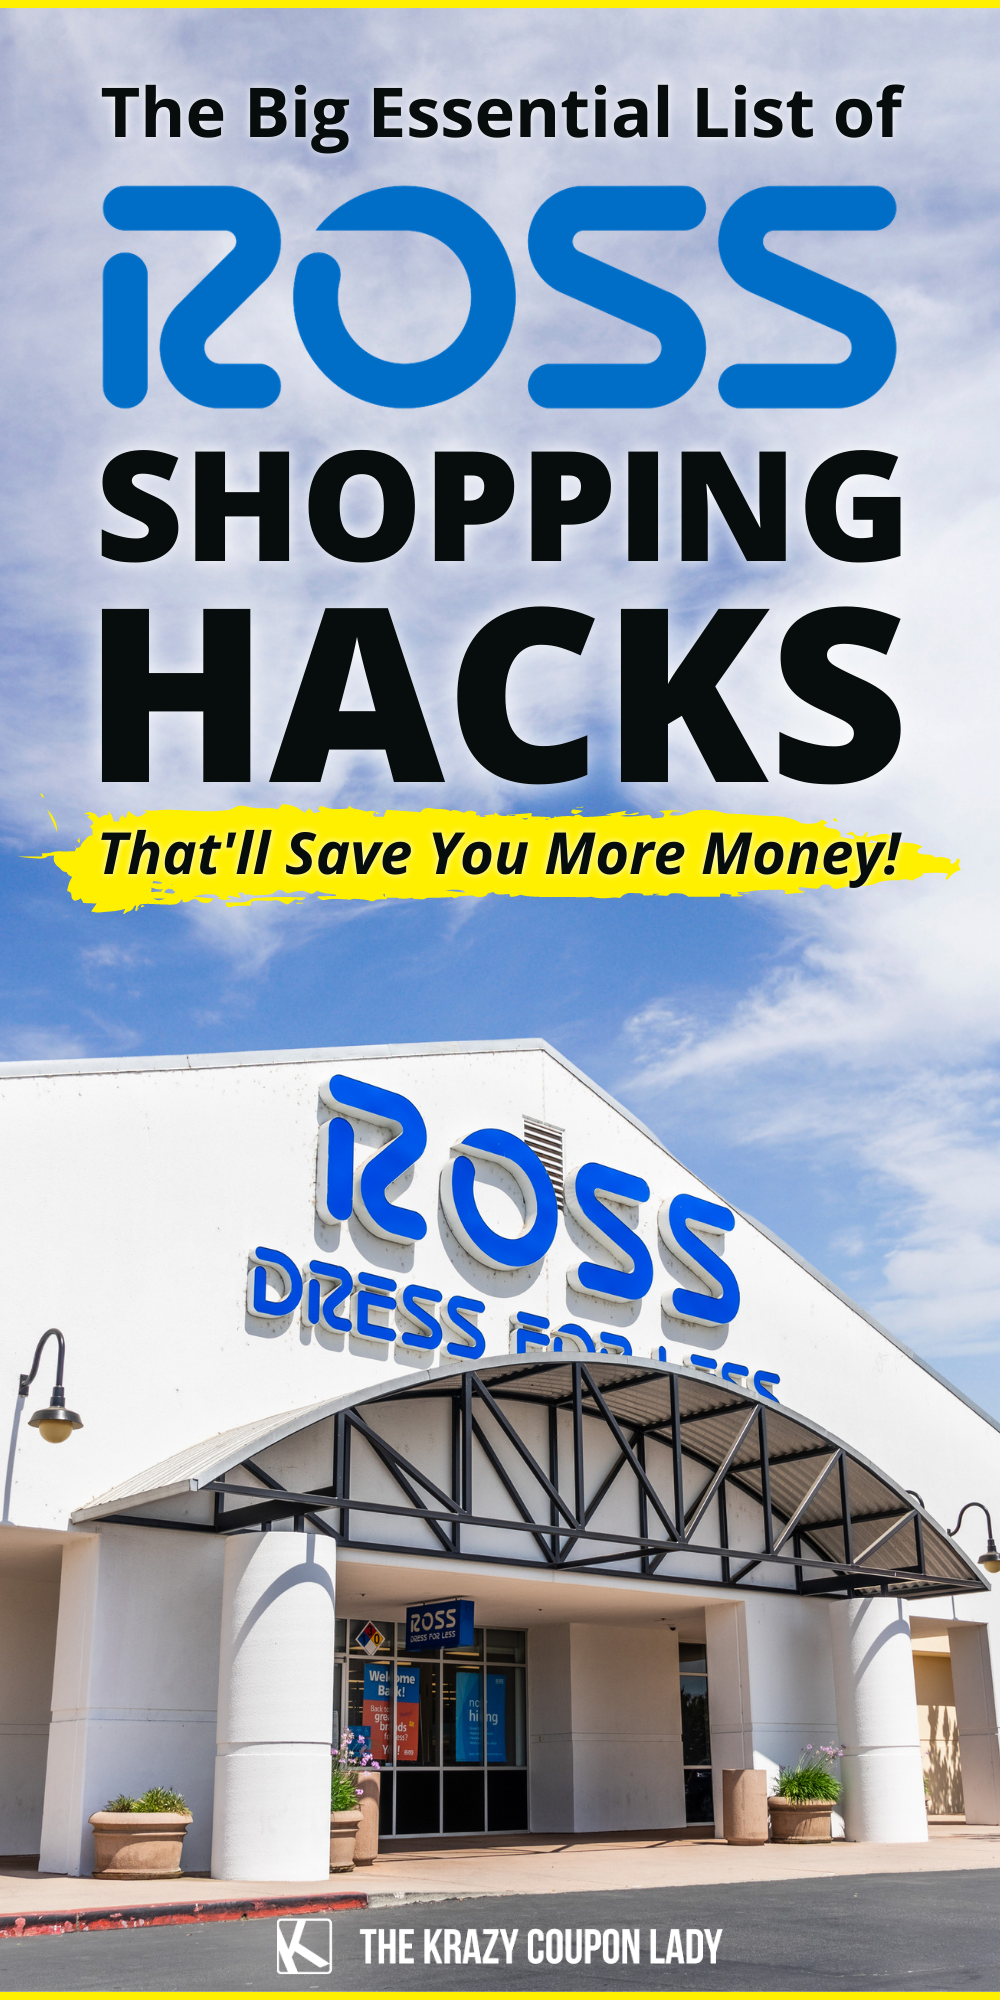 shy half Luster Ross Dress For Less: 20 Ways To Save More - The Krazy Coupon Lady